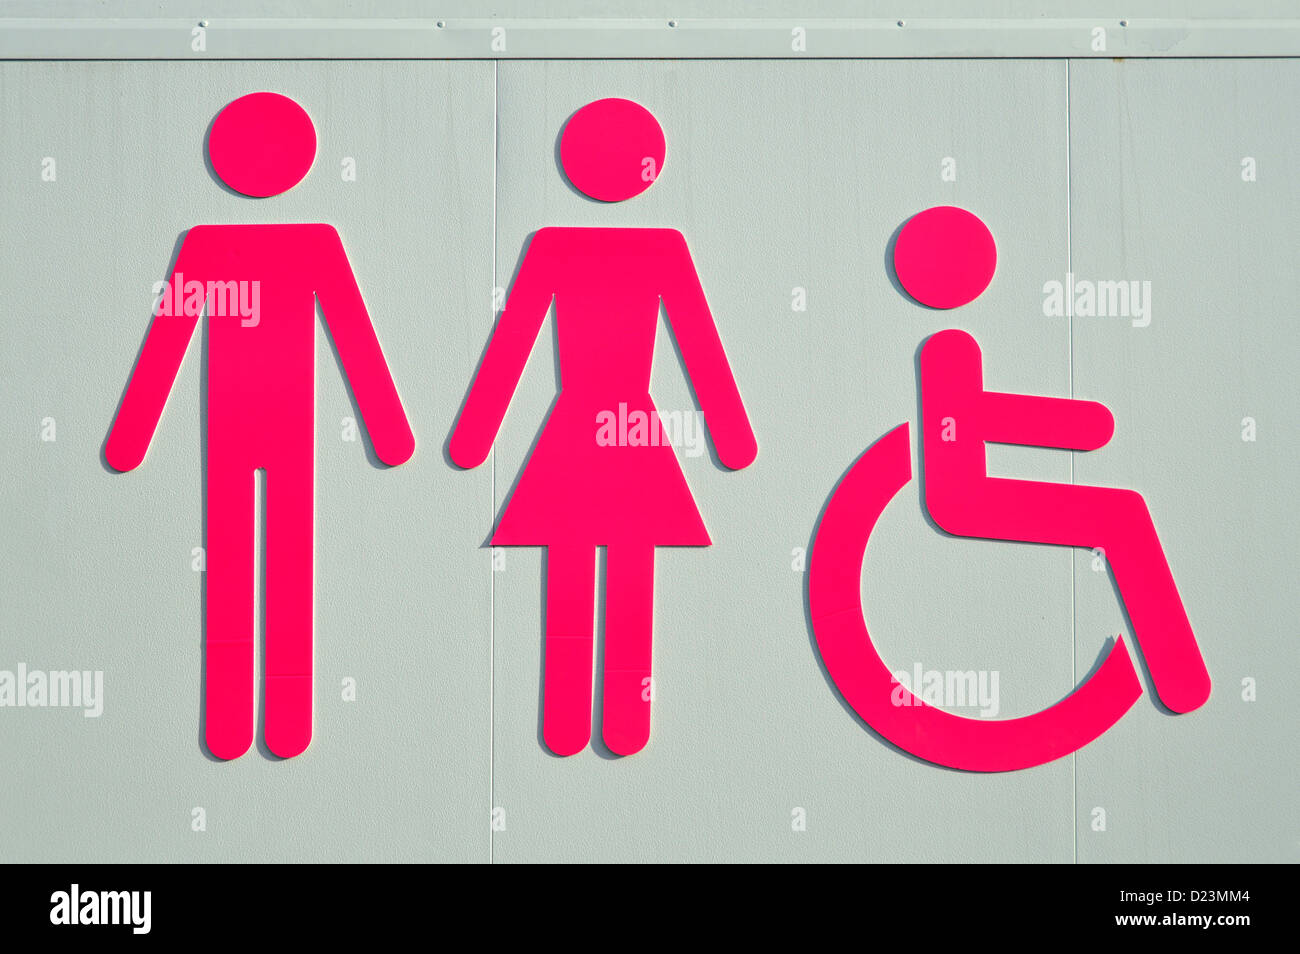 Wc toilet sign symbol for ladies gents and disabled facilities England UK Stock Photo